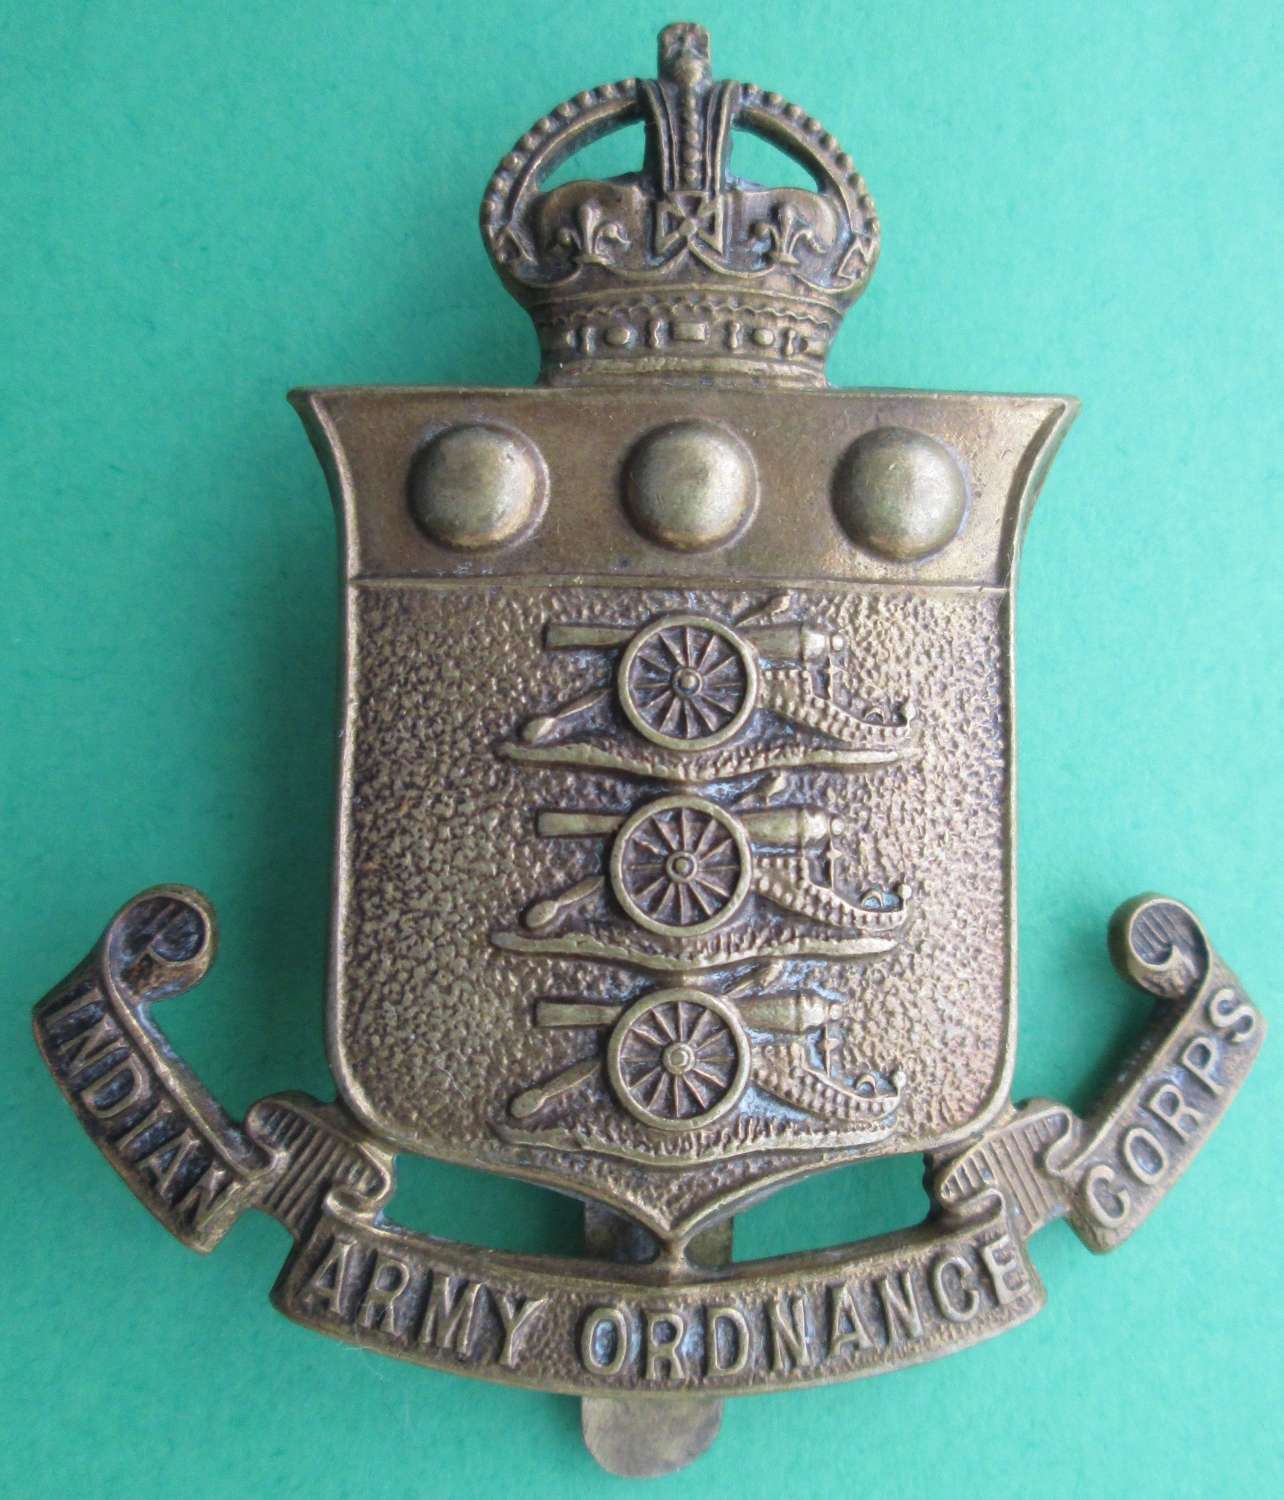 AN INDIAN ARMY ORDNANCE CORPS CAP BADGE